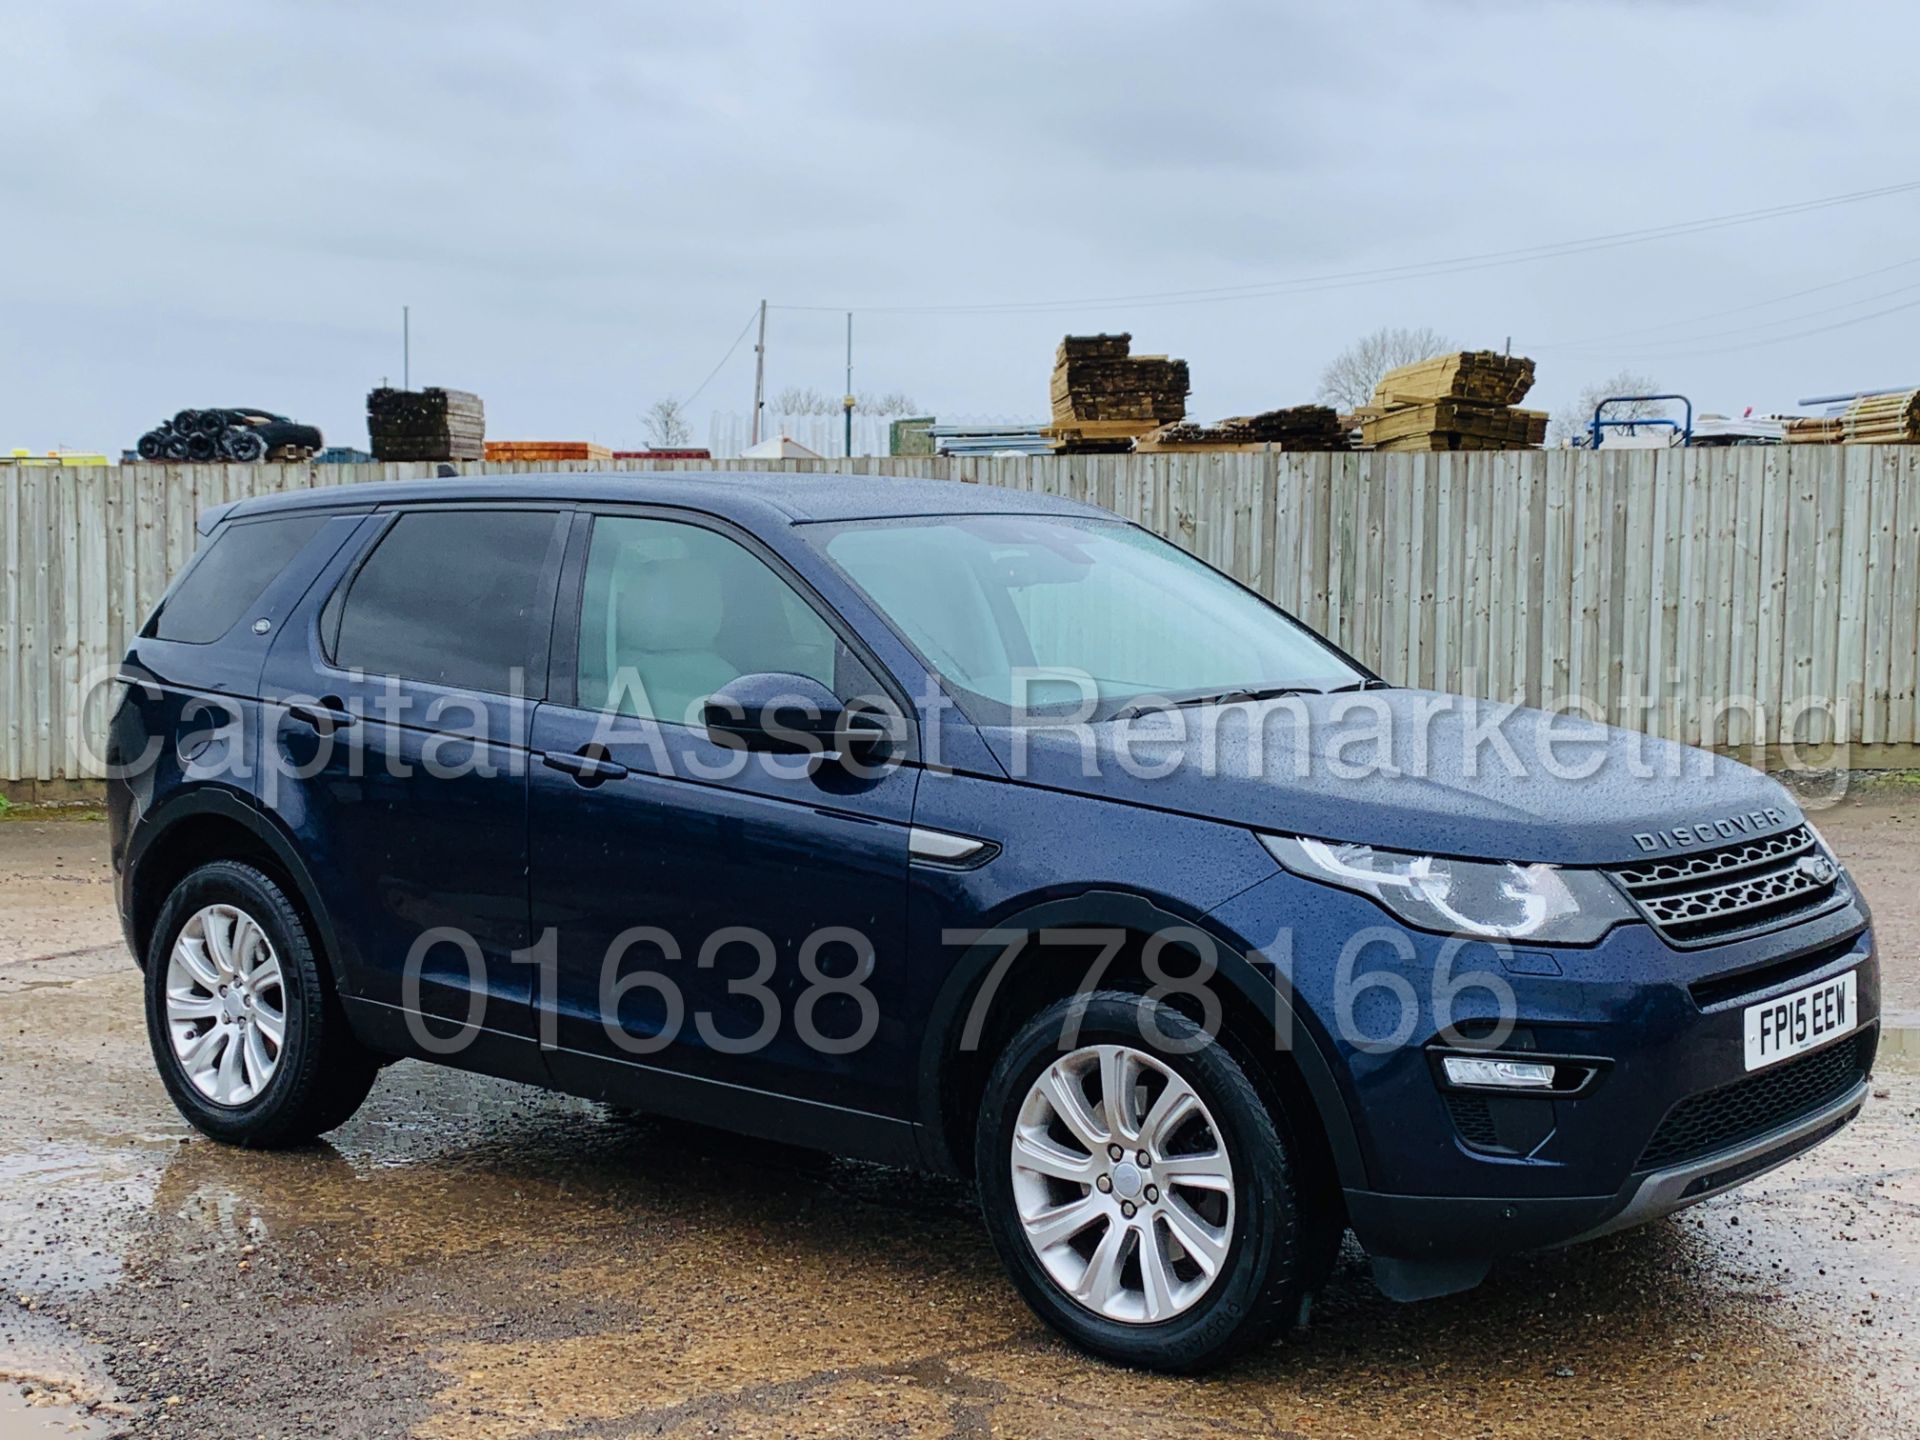 (On Sale) LAND ROVER DISCOVERY SPORT *SE TECH* 7 SEATER SUV (2015) '2.2 SD4-AUTO' *LEATHER-SAT NAV* - Image 3 of 57